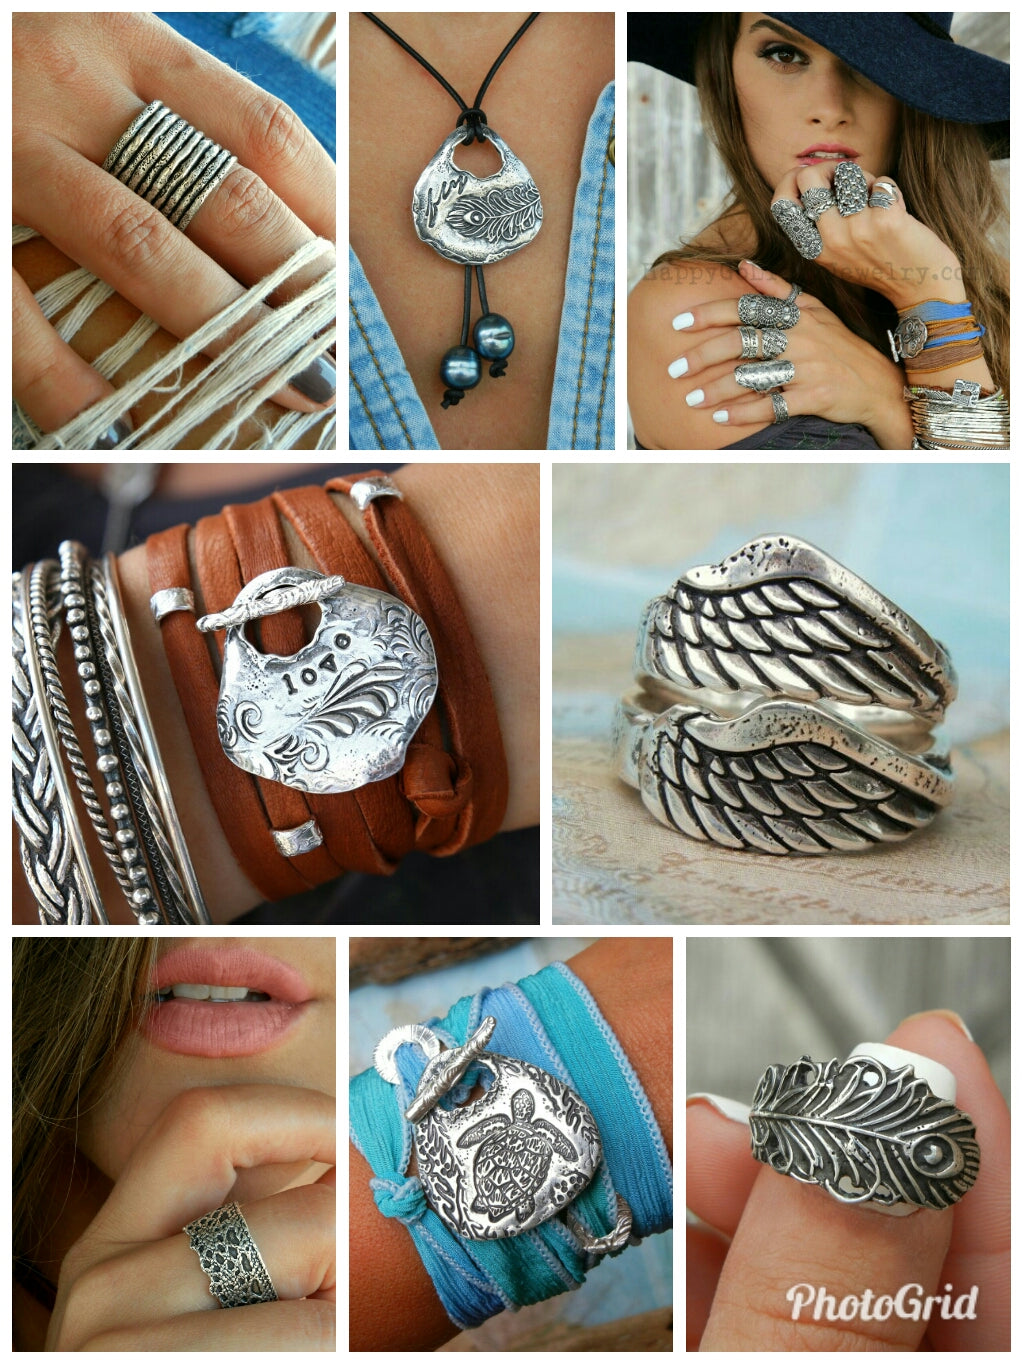 Nautical Rope Ring - HappyGoLicky Jewelry